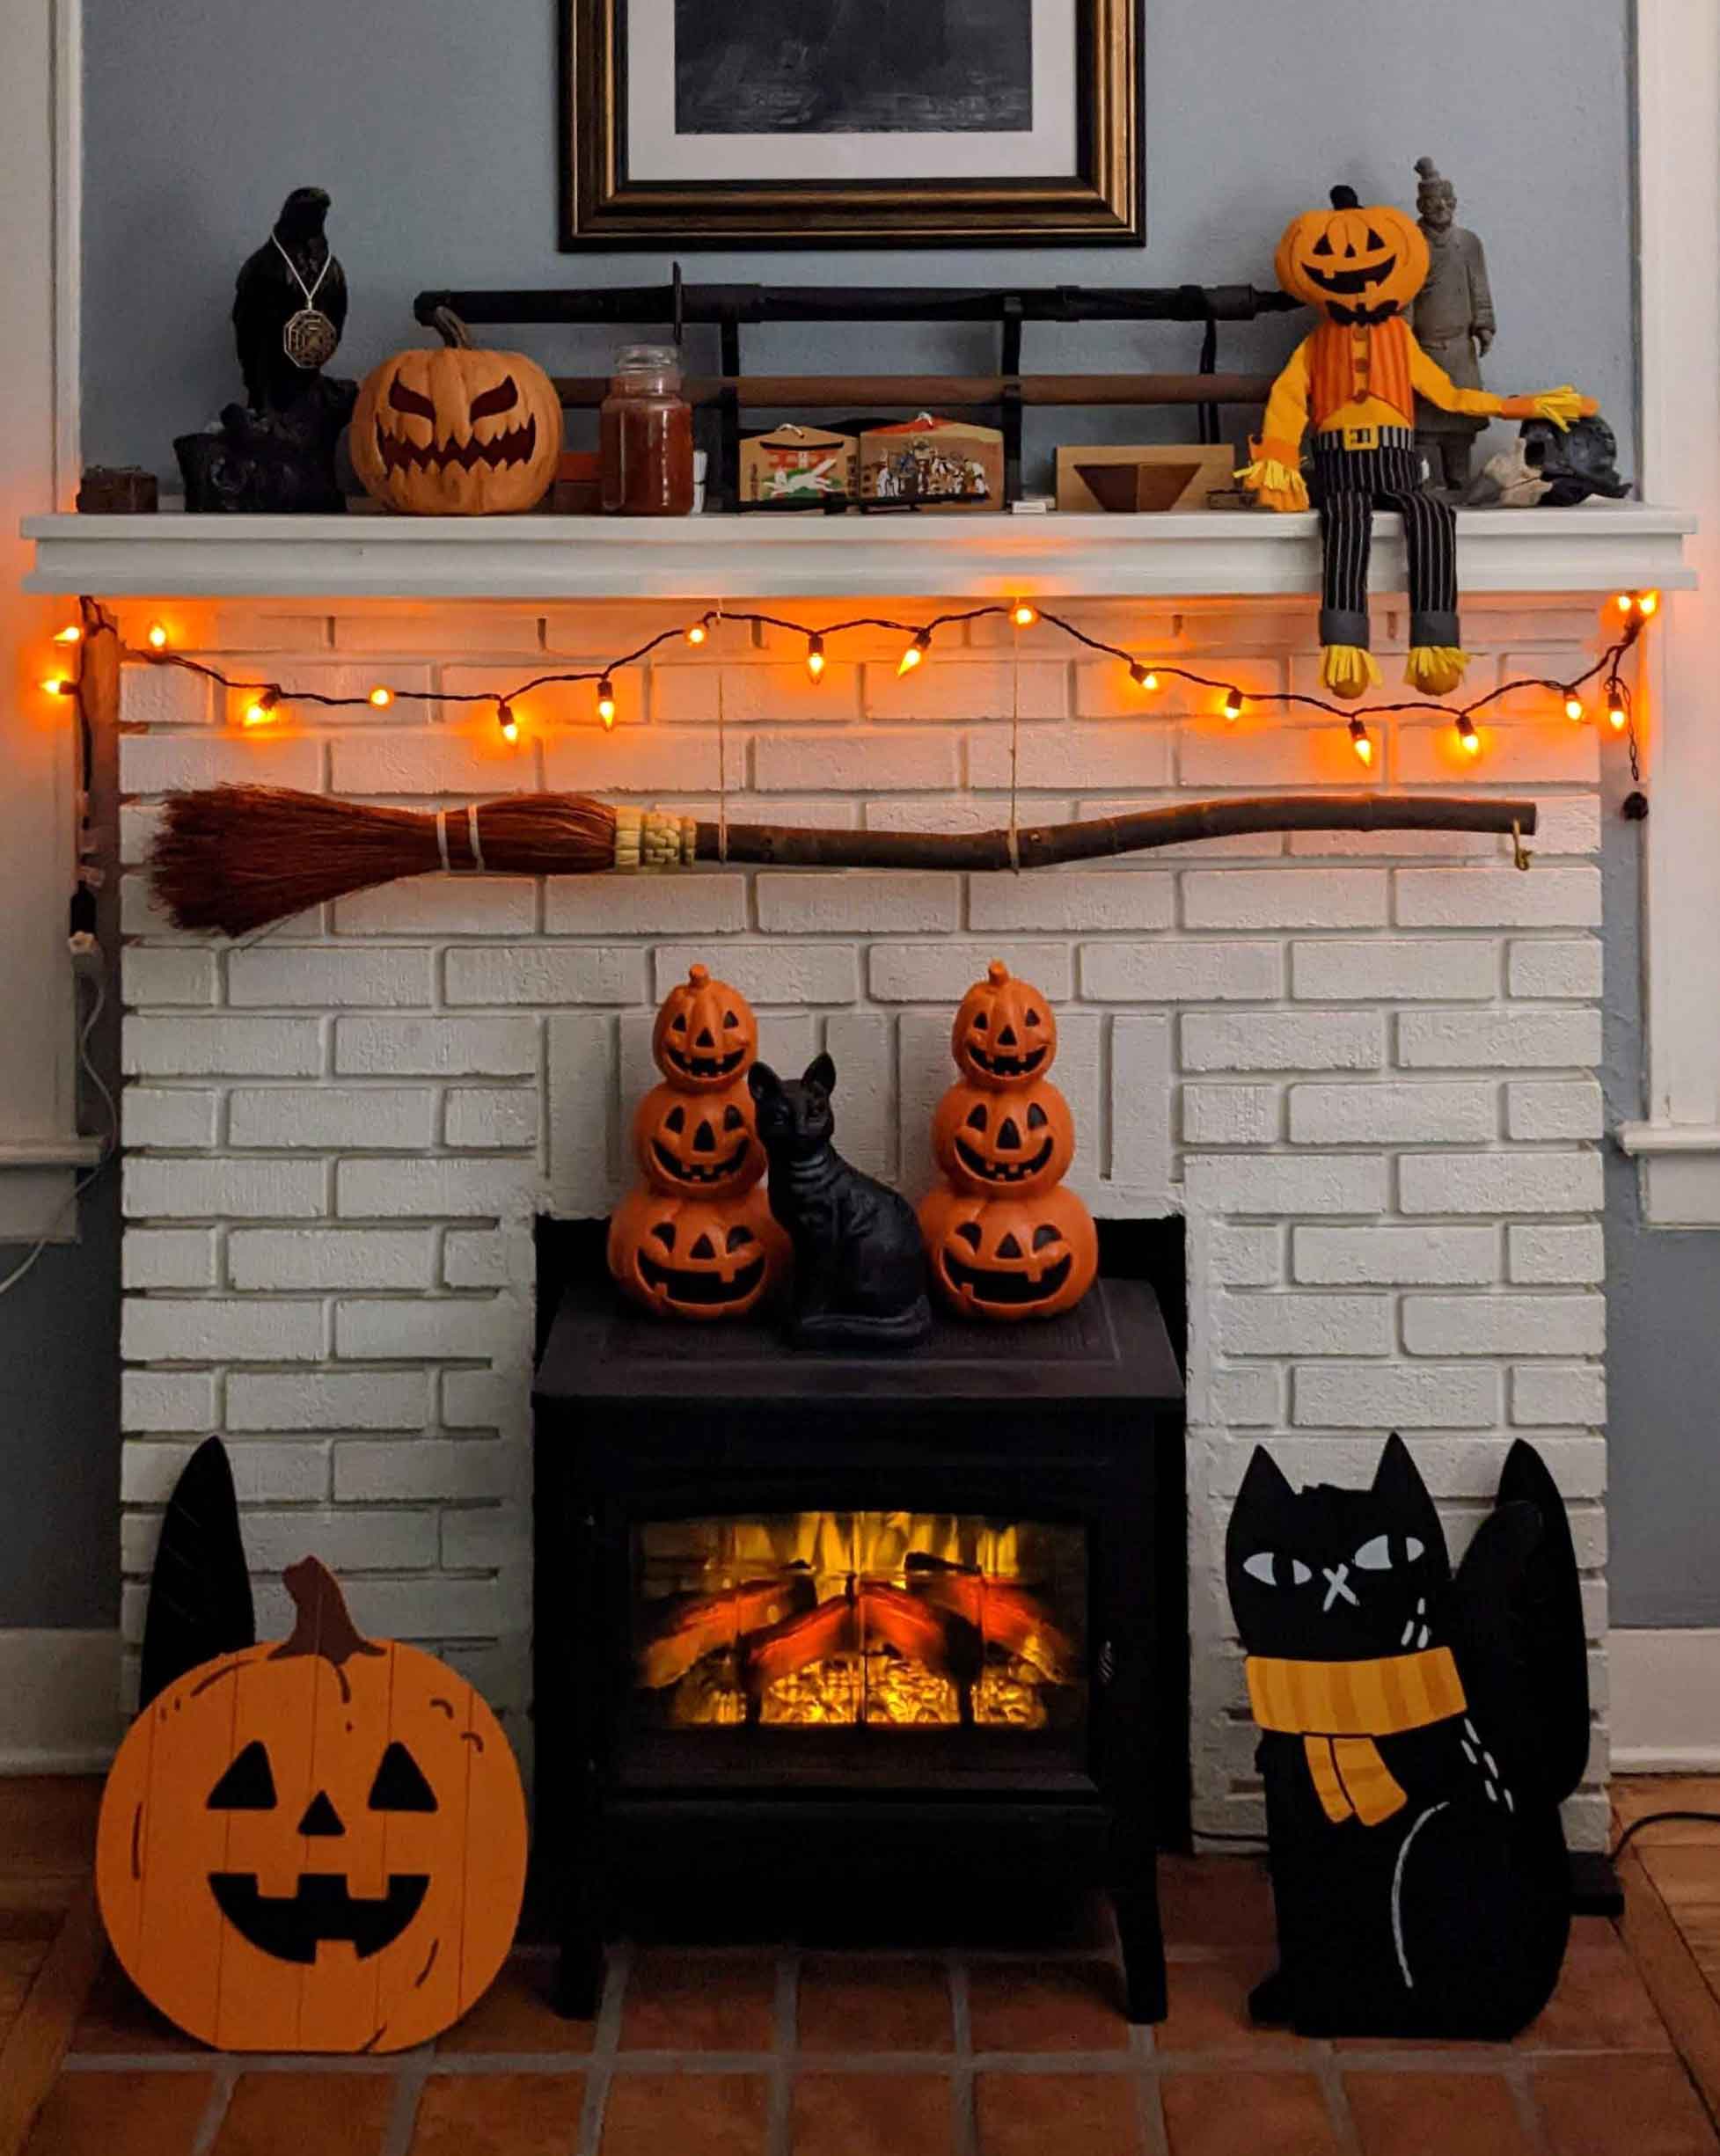 Fire place decorated with pumpkins, cats, broom and fairy lights